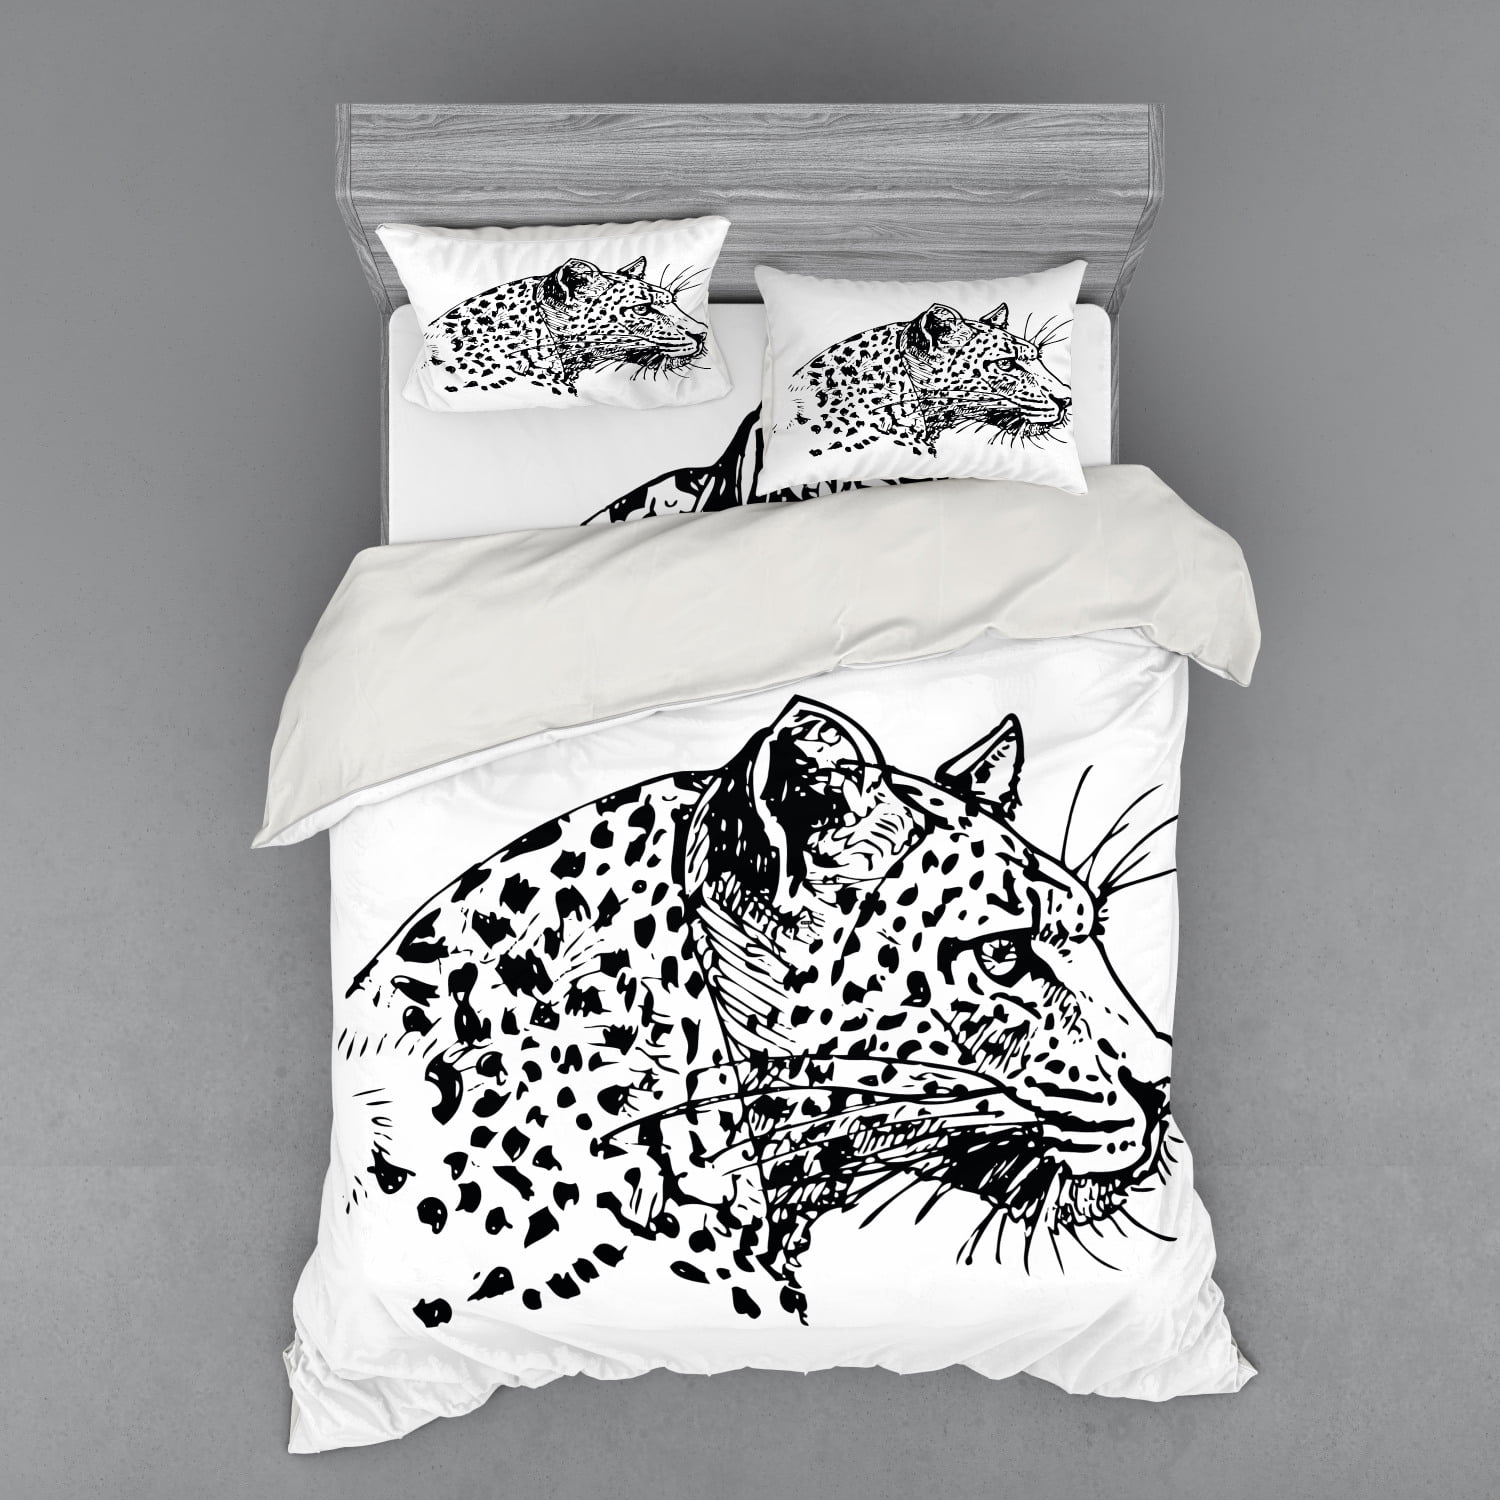 Ambesonne Animal Bedding Set Duvet Cover Sham Fitted Sheet in 3 Sizes 